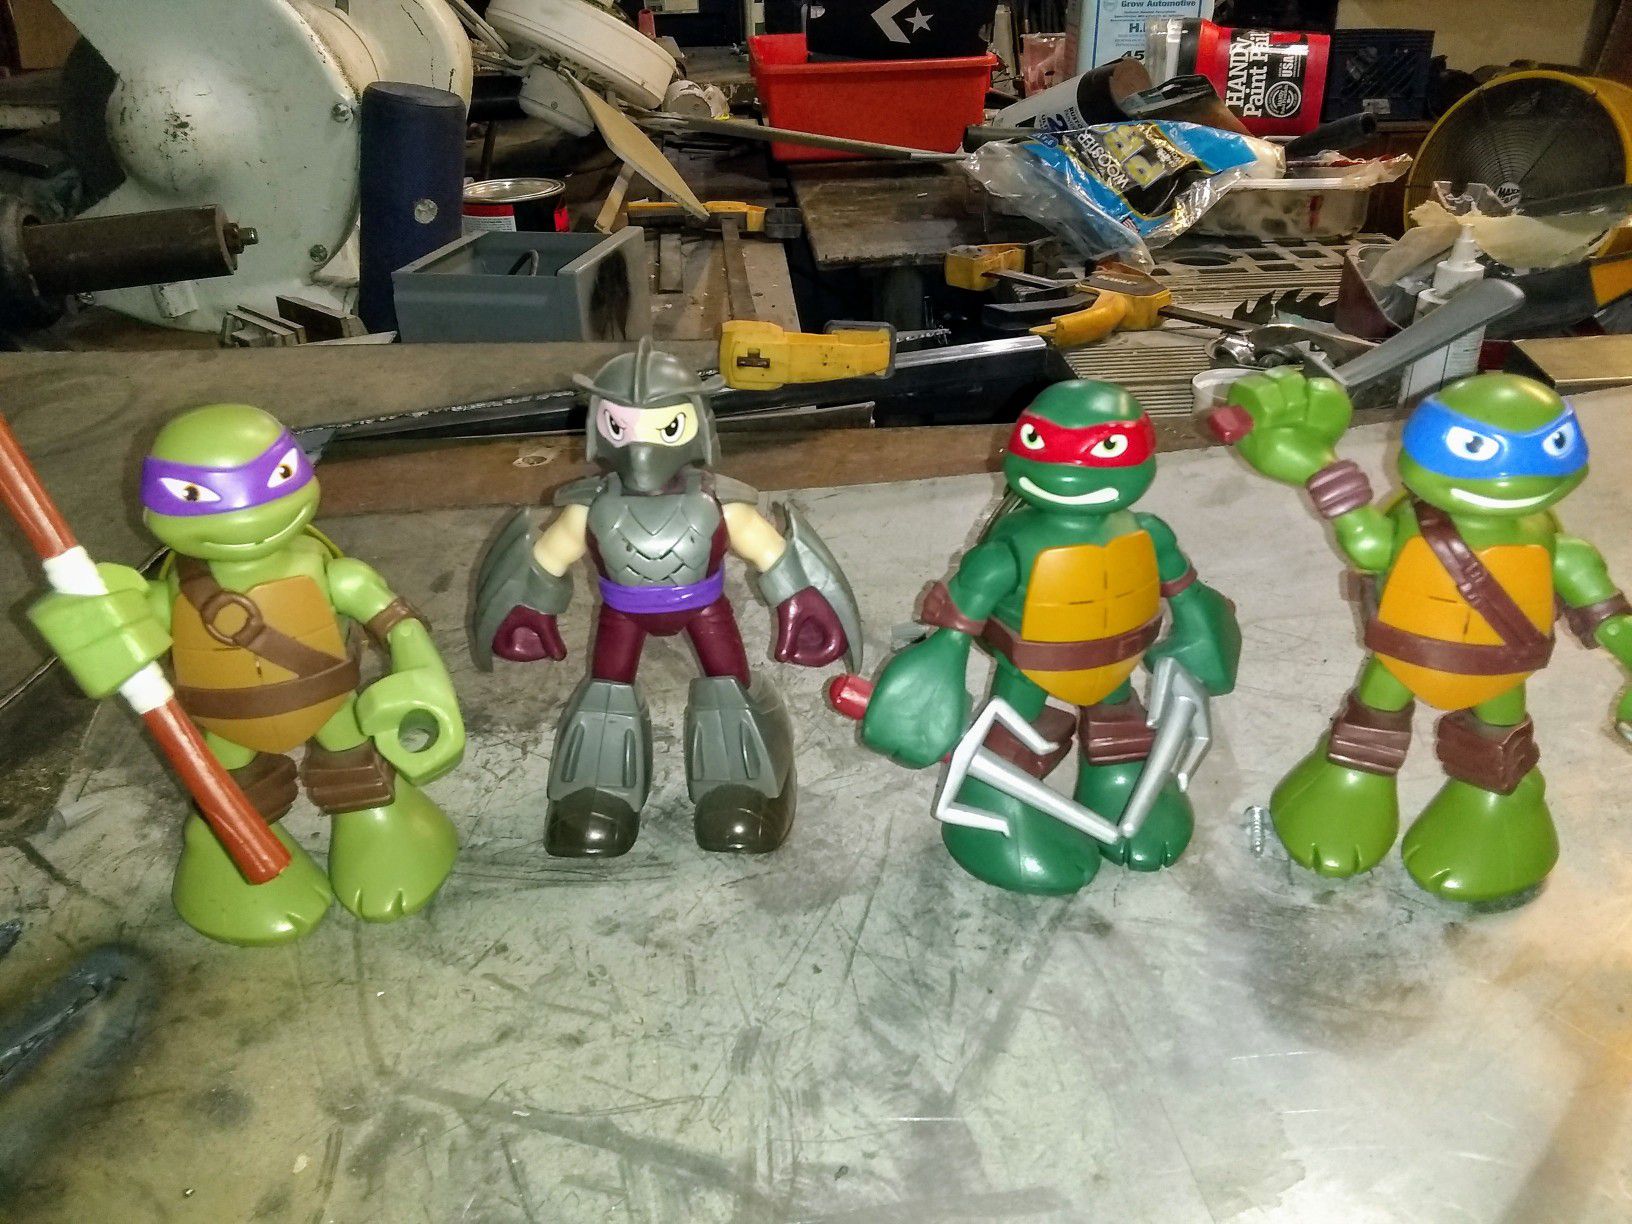 FULL SIZE ACTION AND SOUND ACTIVATED NINJA TURTLE ACTION FIGURES